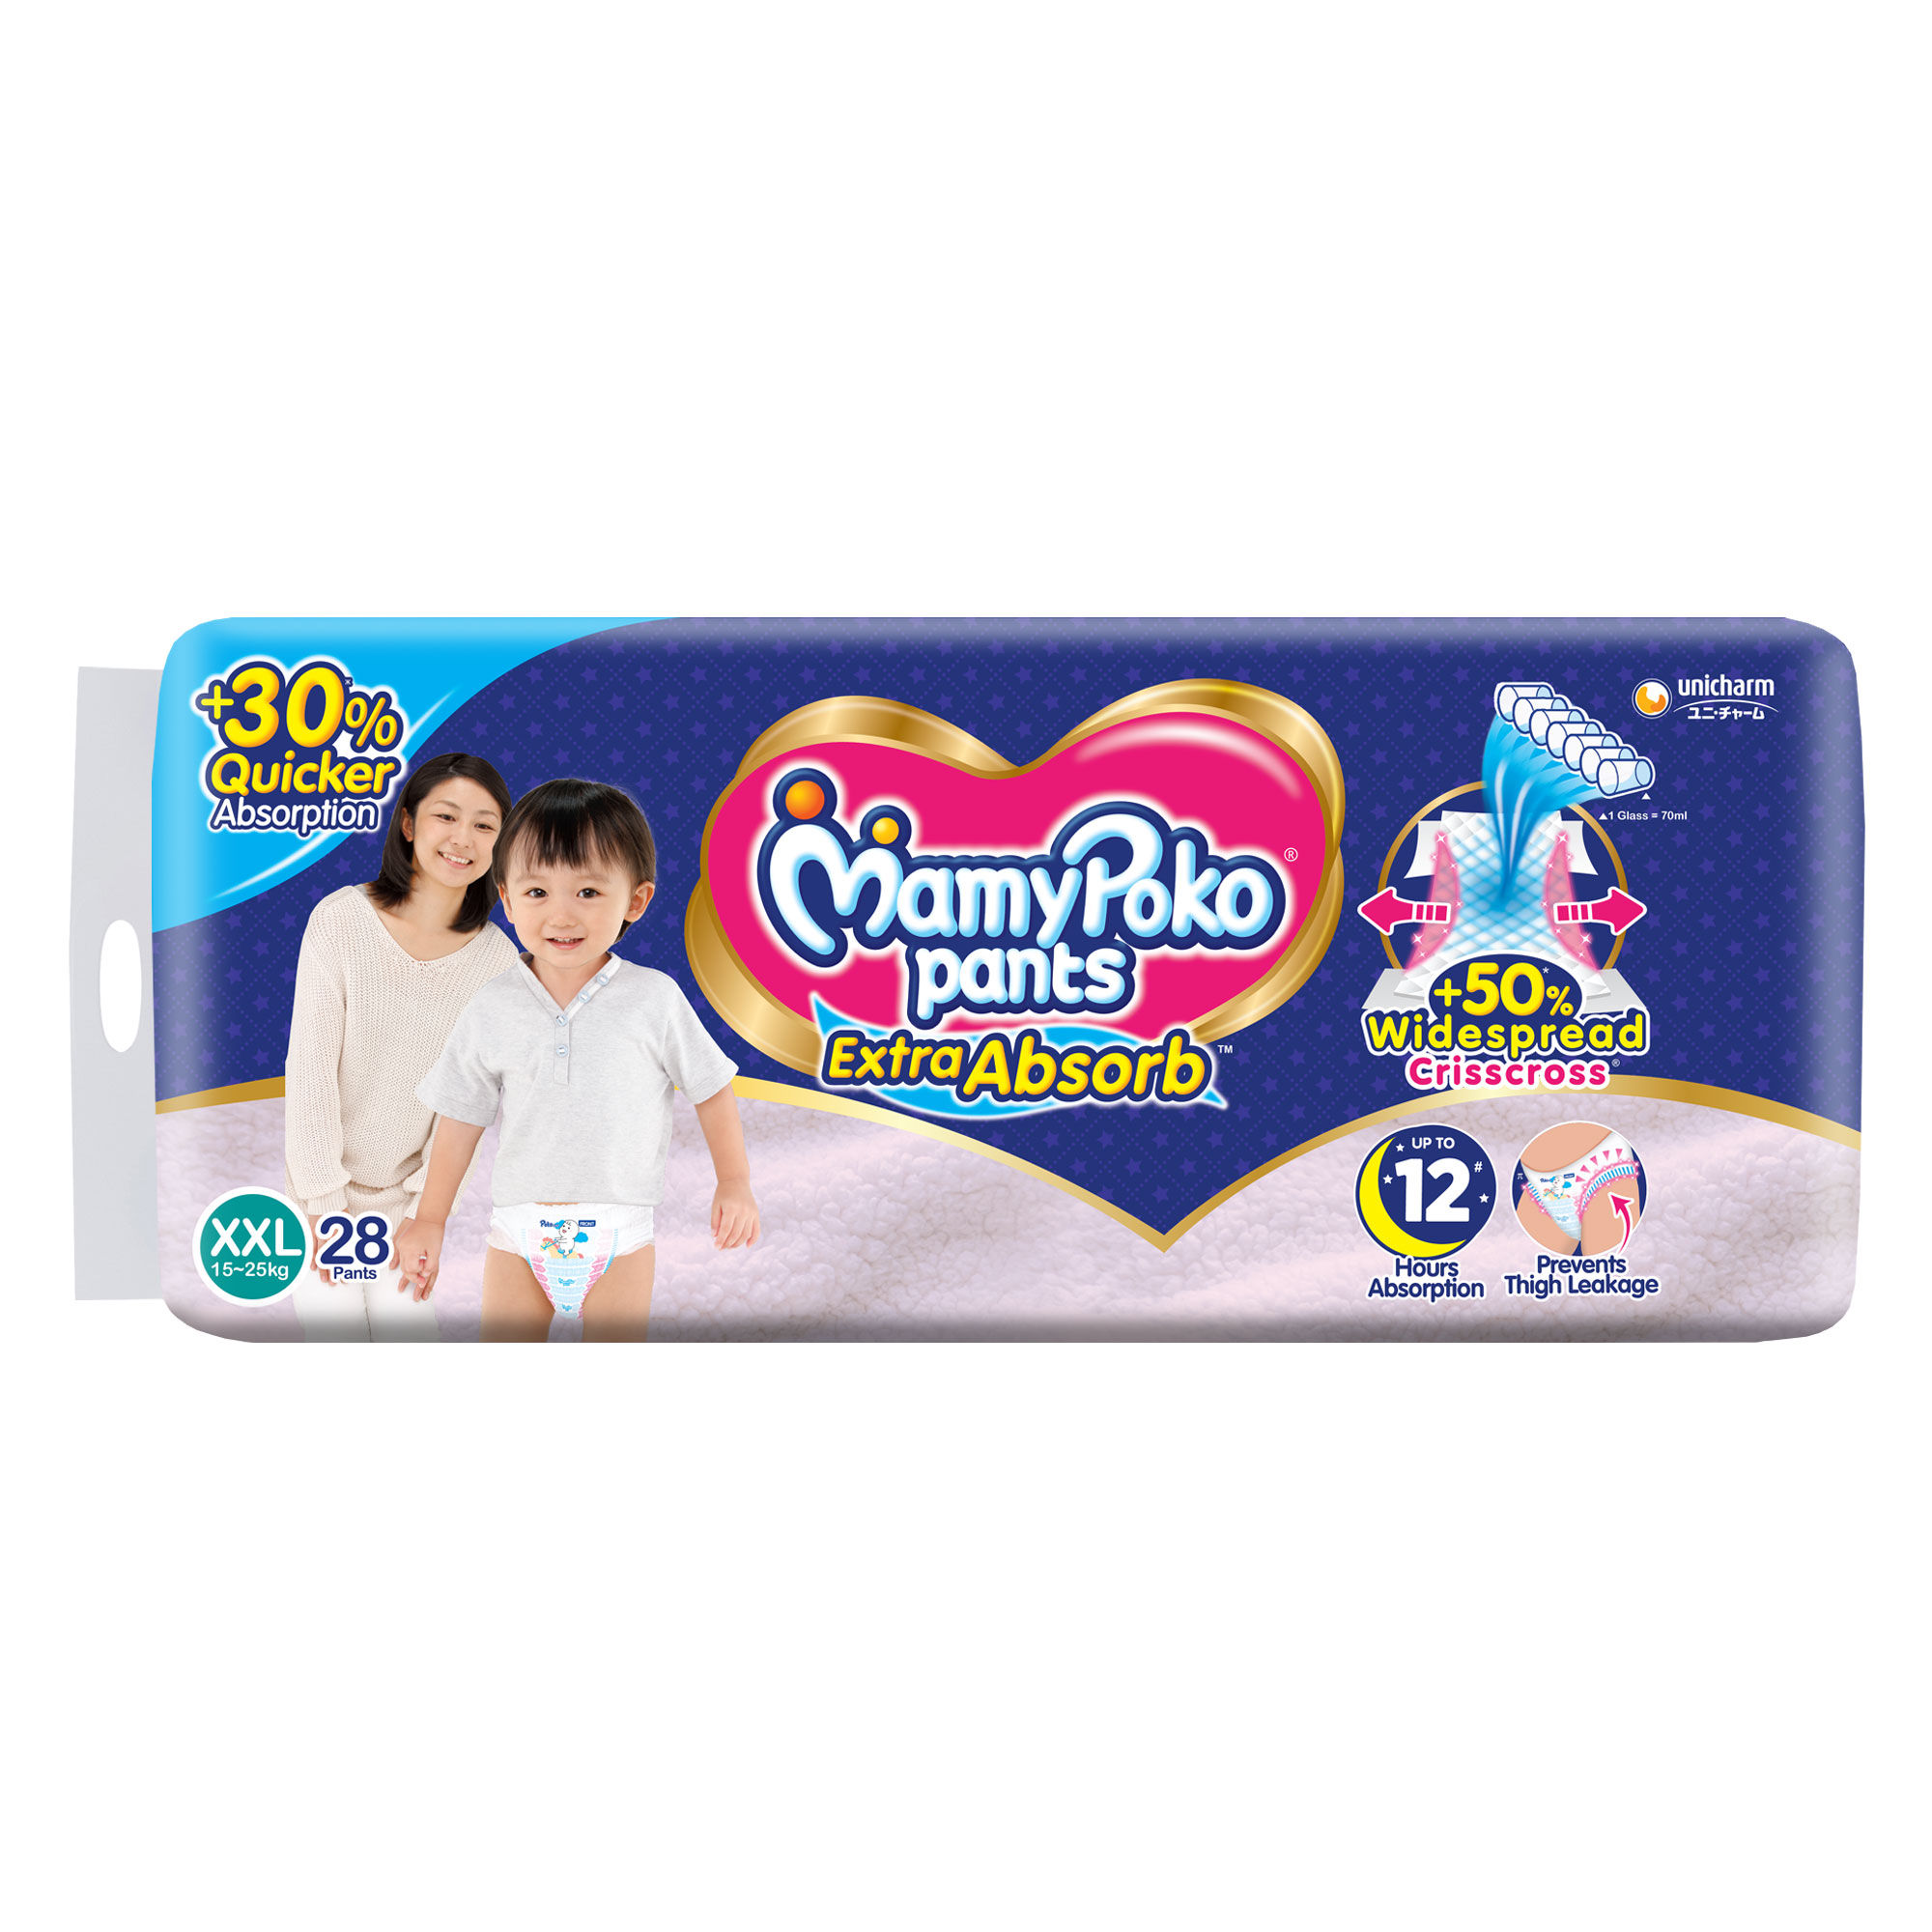 MamyPoko Pants Extra Absorb for New Born upto 5kg Baby Buy packet of 58  units at best price in India  1mg